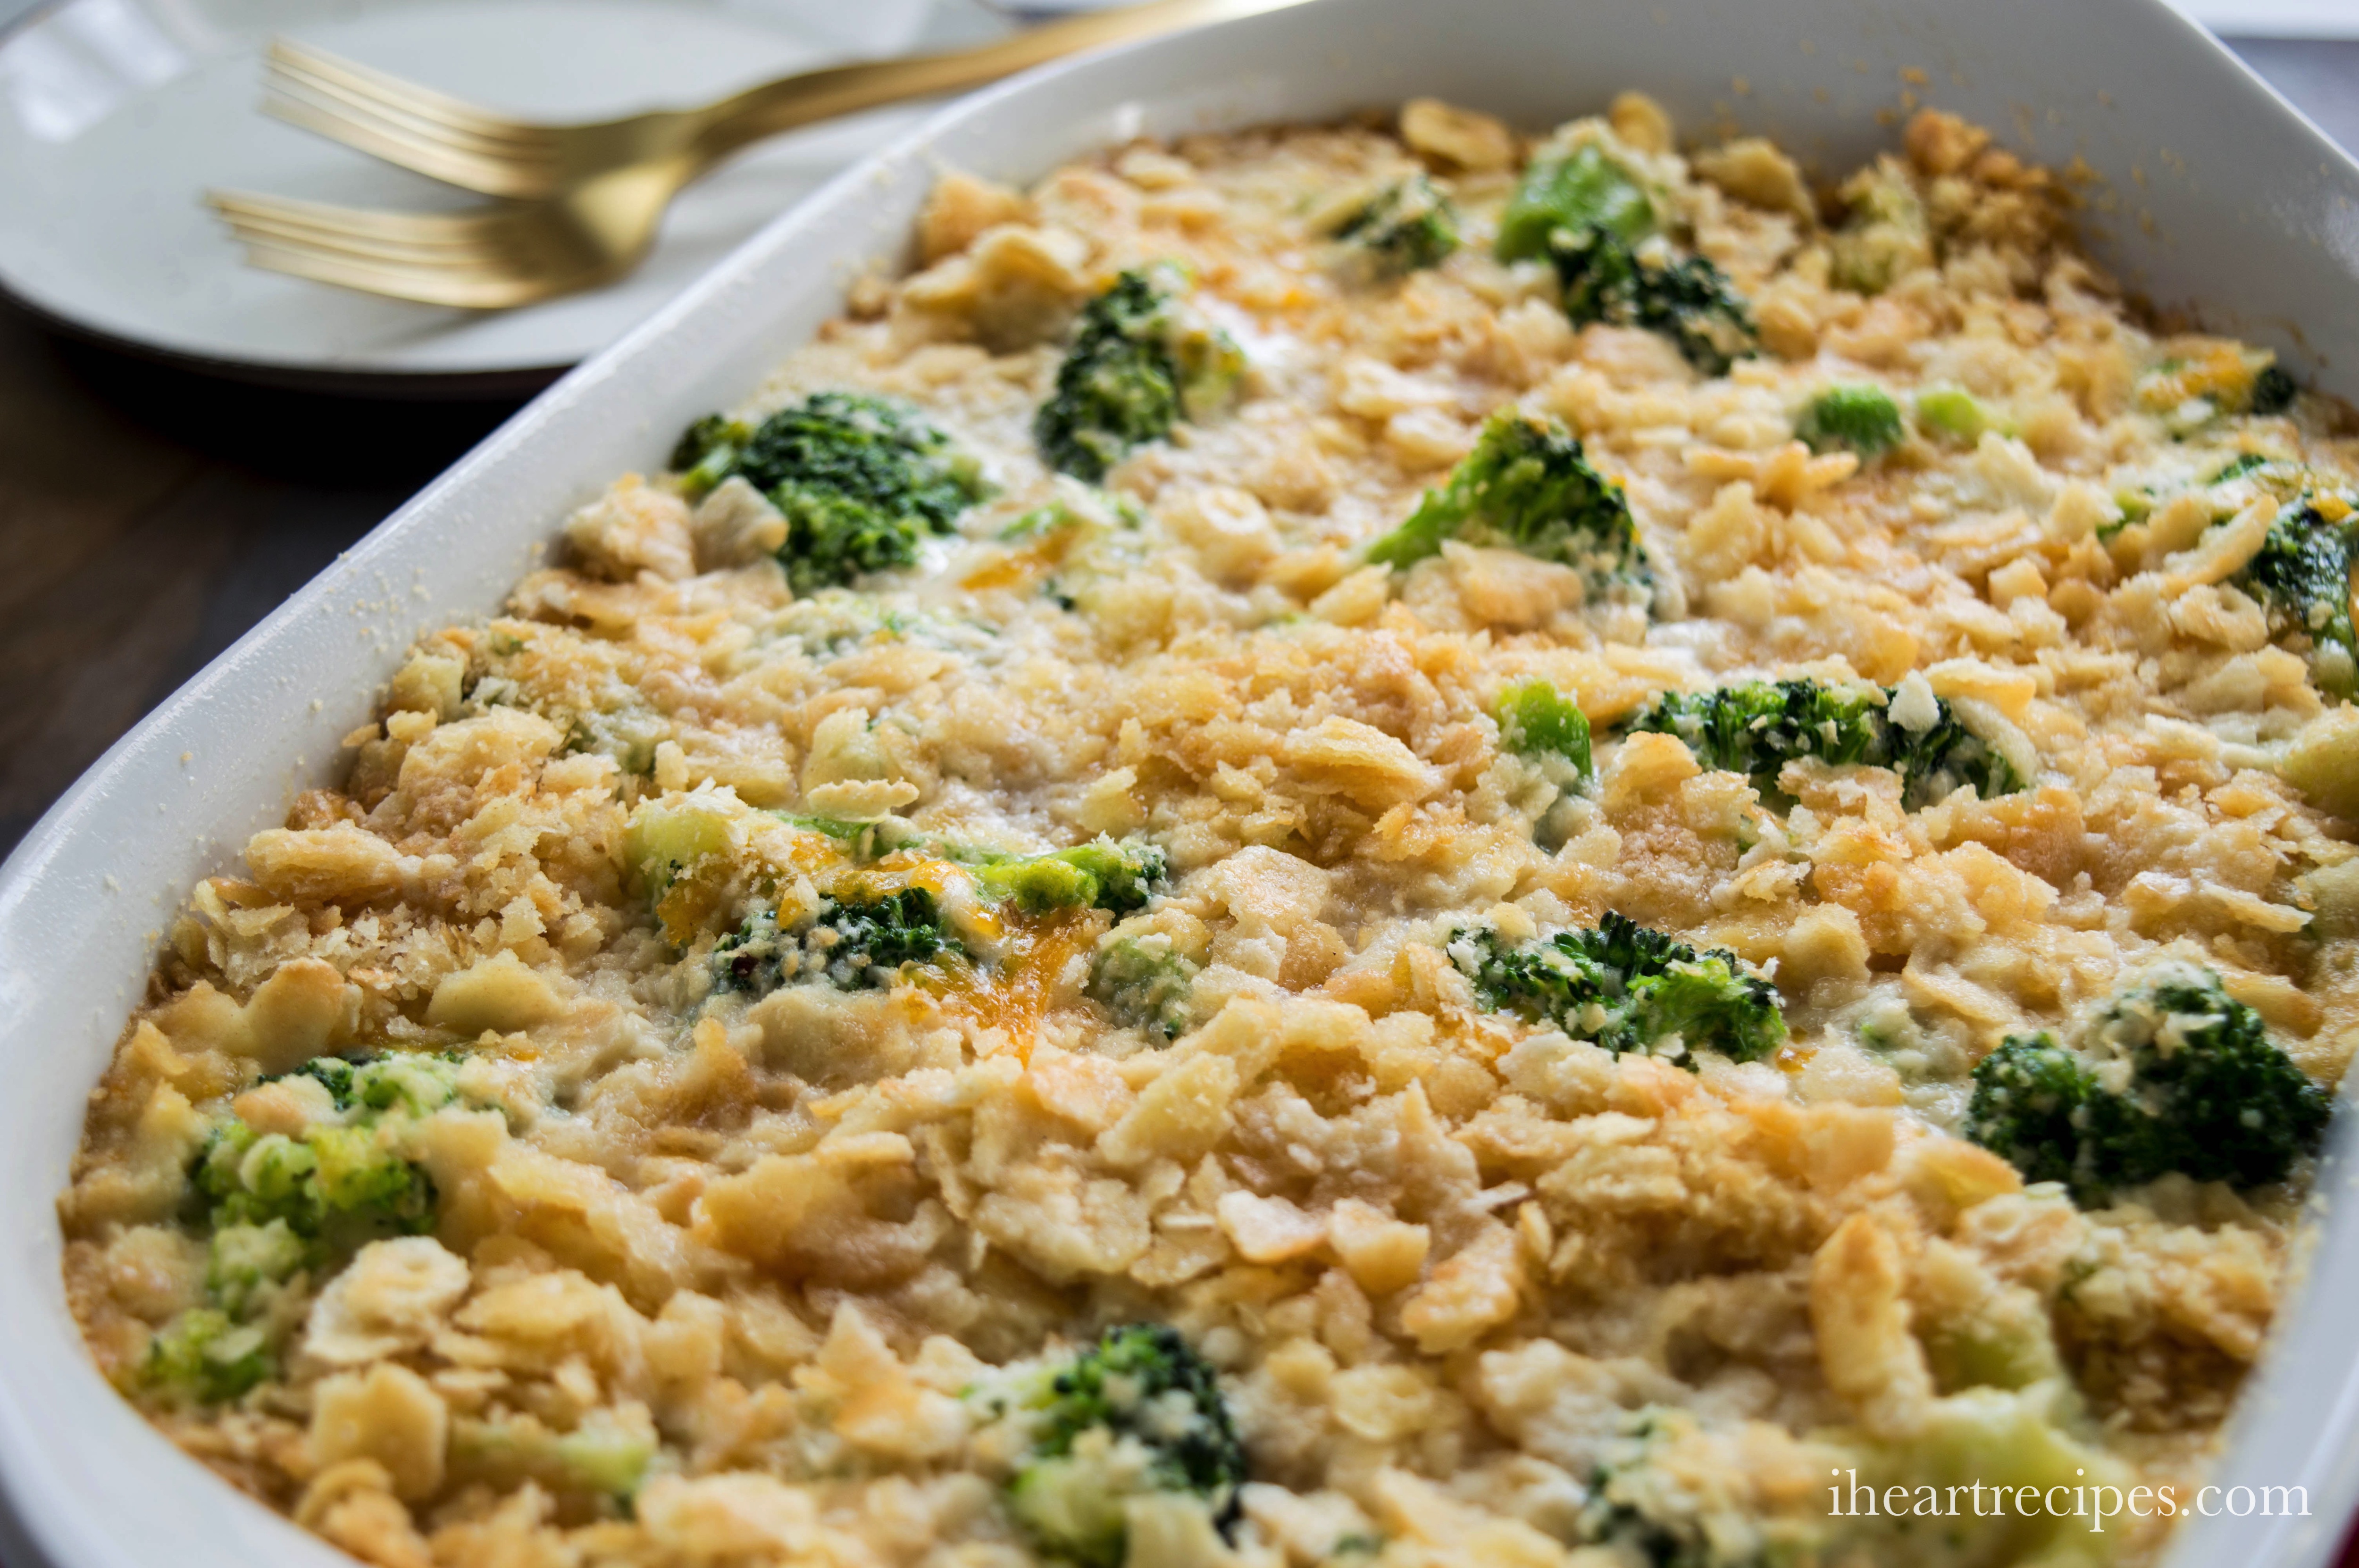 A round white casserole dish filled with Southern broccoli casserole. The dish is topped with crumbled buttery crackers and baked to a golden-brown finish.